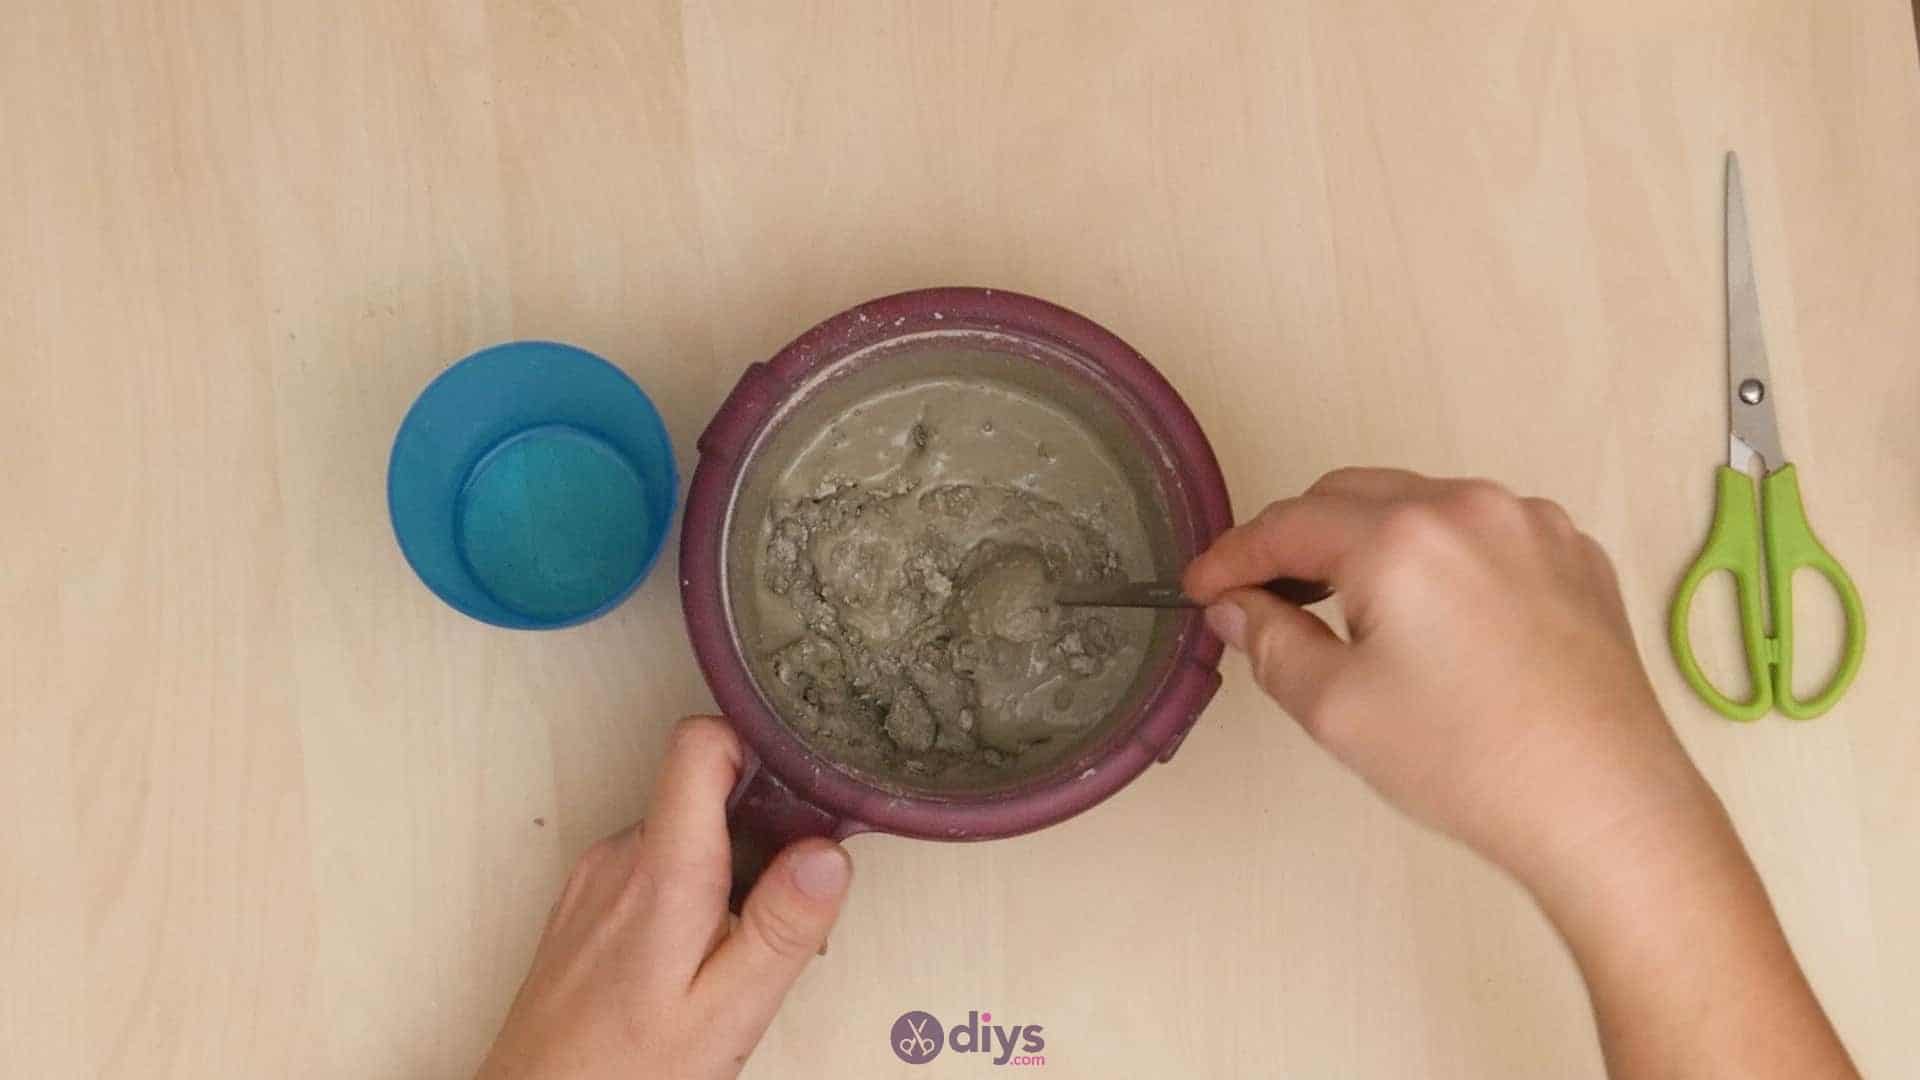 Diy concrete candle holder plate step 1a